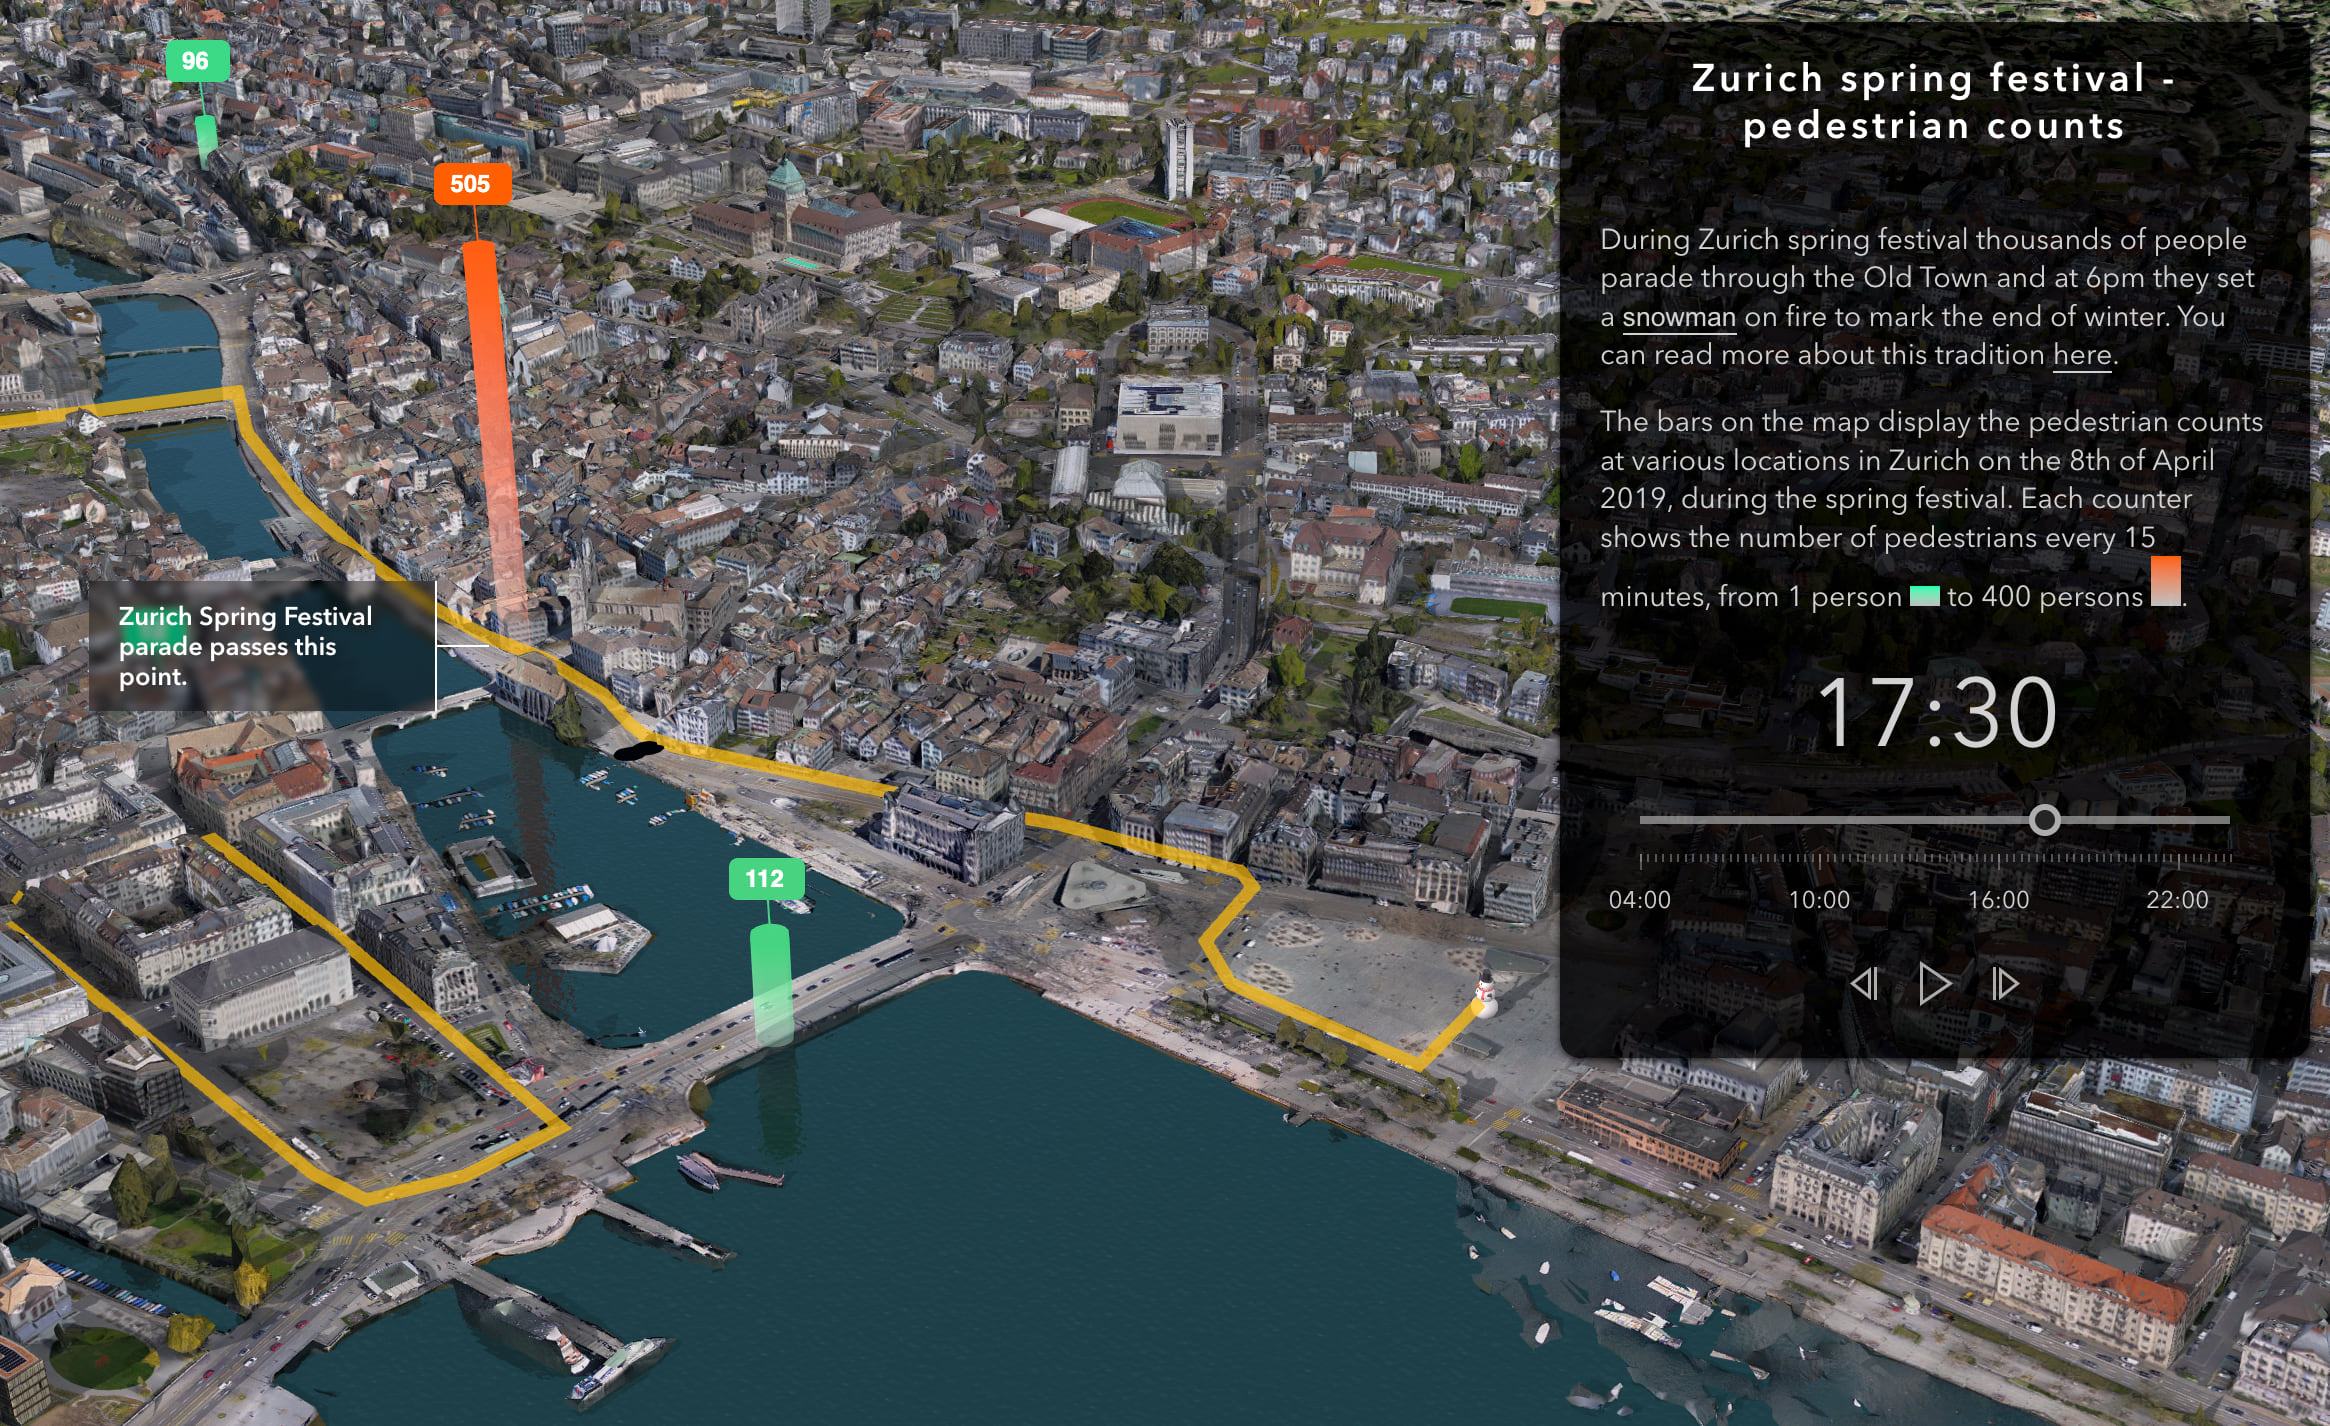 Zurich city center and 3D bars visualizing the pedestrian counts